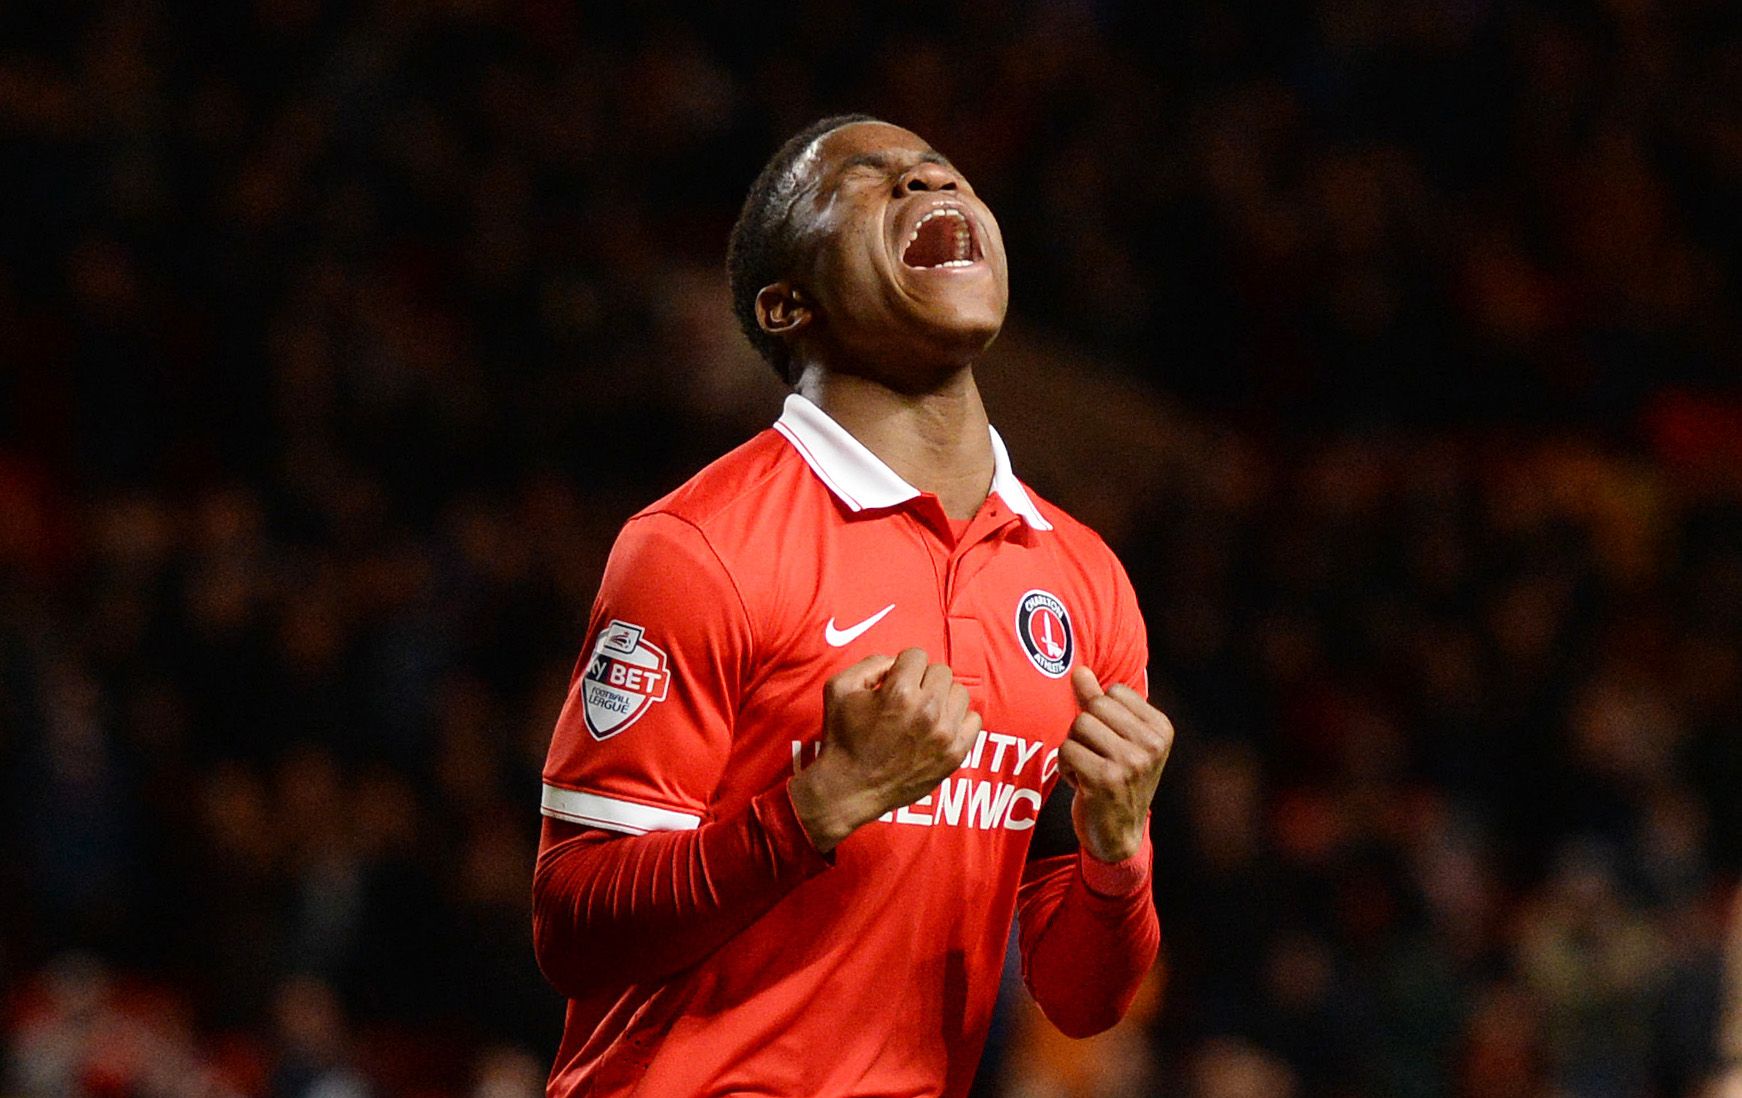 Football Soccer - Charlton Athletic v Bolton Wanderers - Sky Bet Football League Championship - The Valley - 15/12/15 
Charlton's Ademola Lookman celebrates scoring their second goal 
Mandatory Credit: Action Images / Tony O'Brien 
Livepic 
EDITORIAL USE ONLY. No use with unauthorized audio, video, data, fixture lists, club/league logos or 